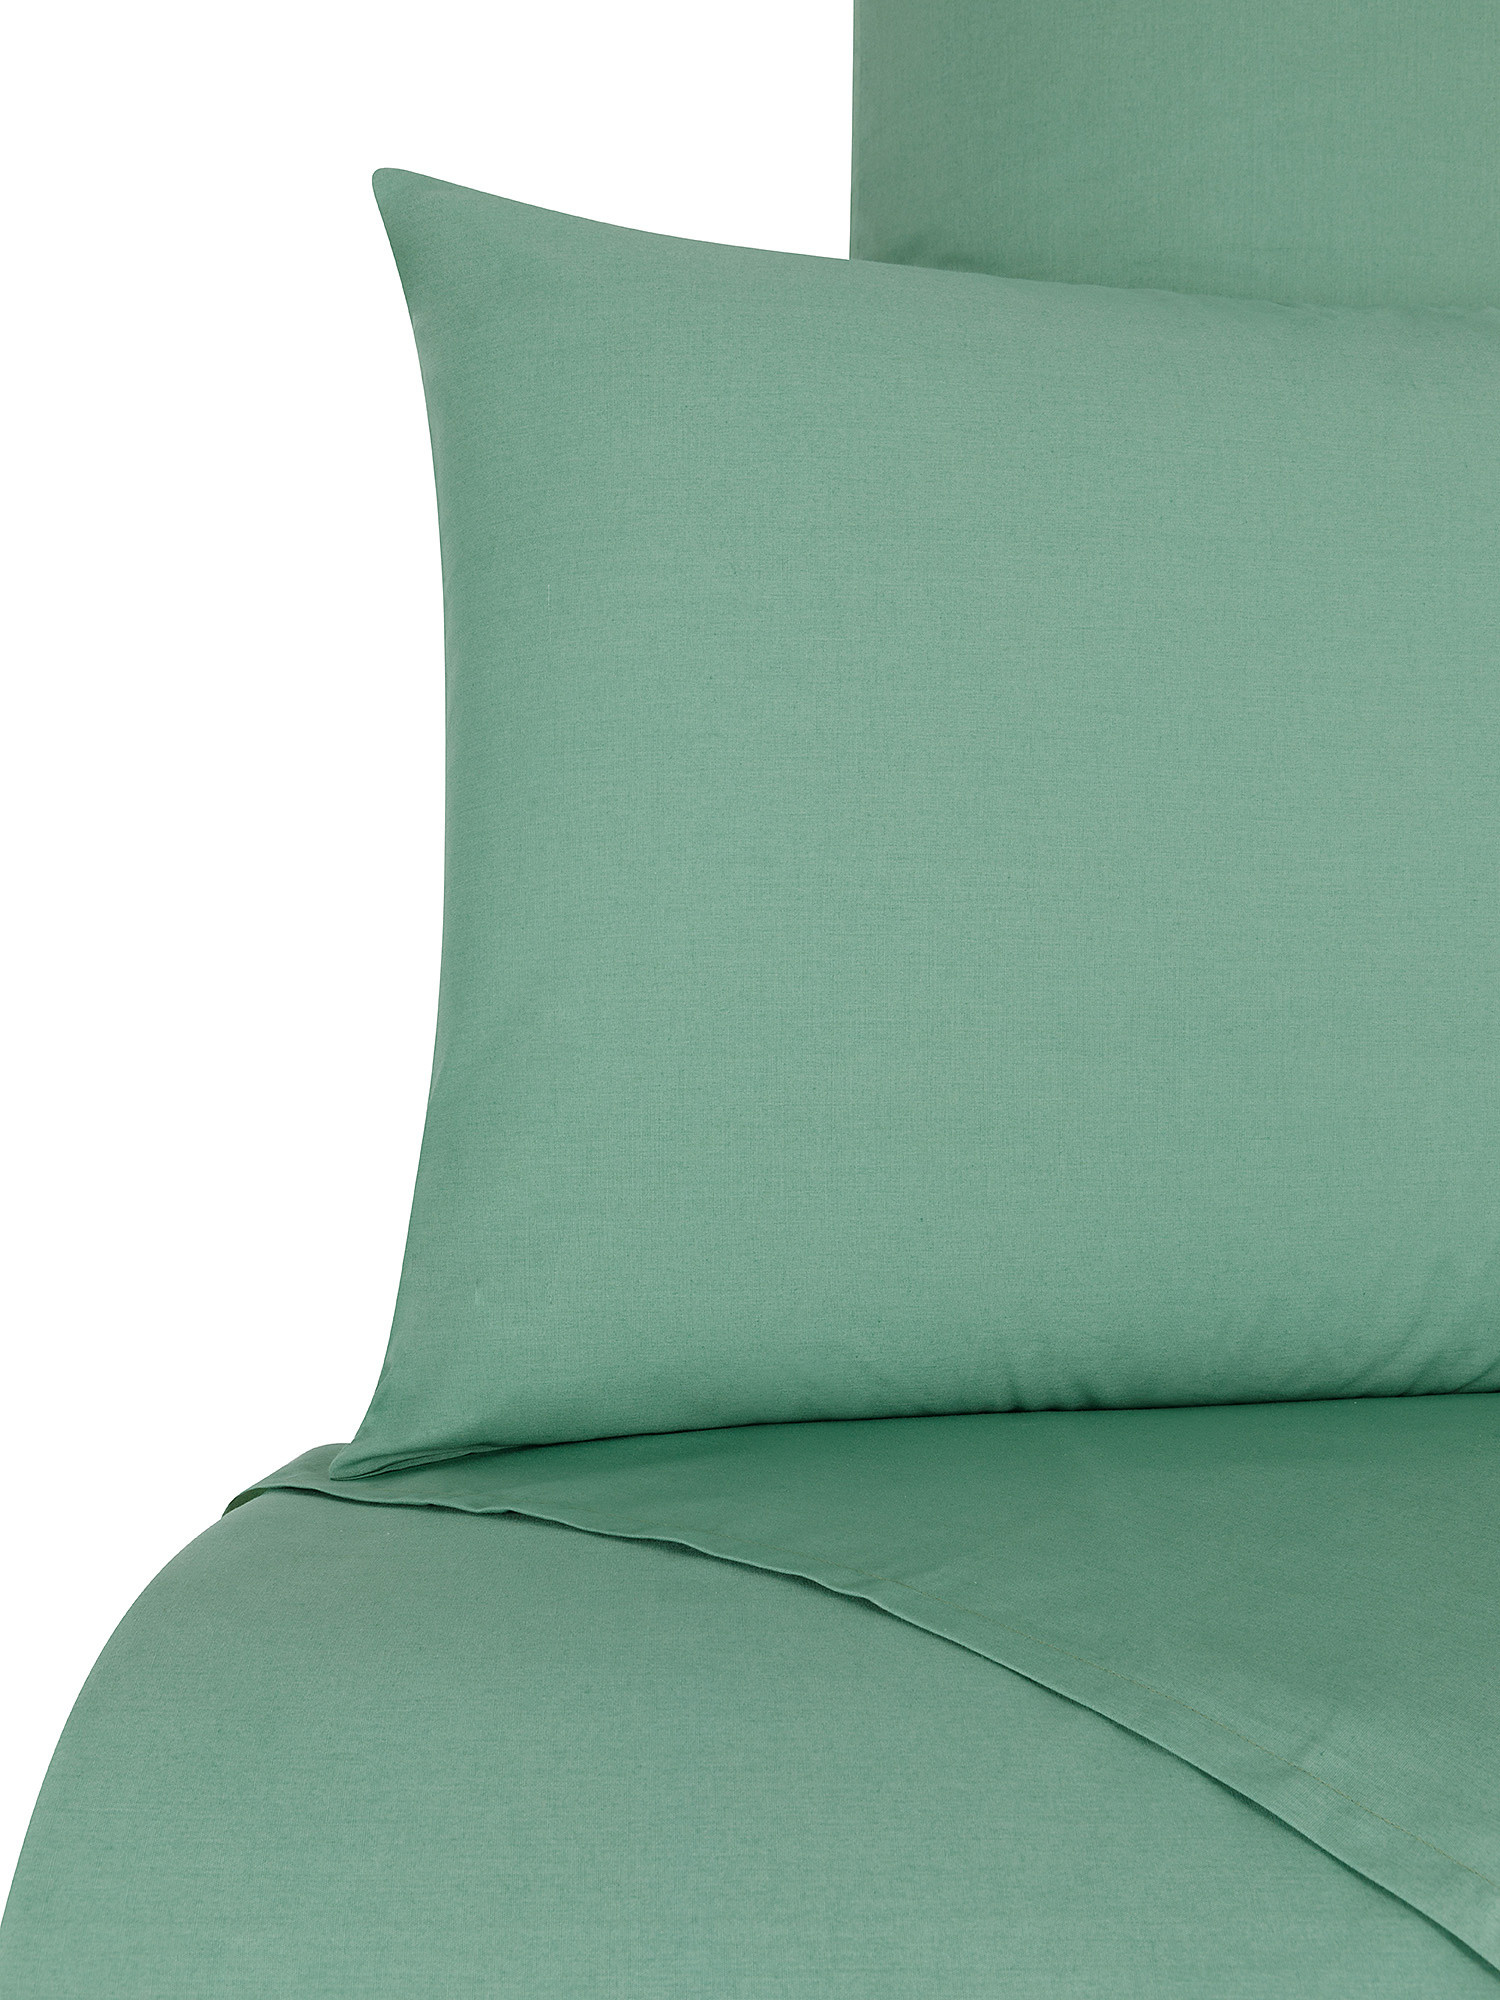 Solid color cotton percale sheet set, Green, large image number 1